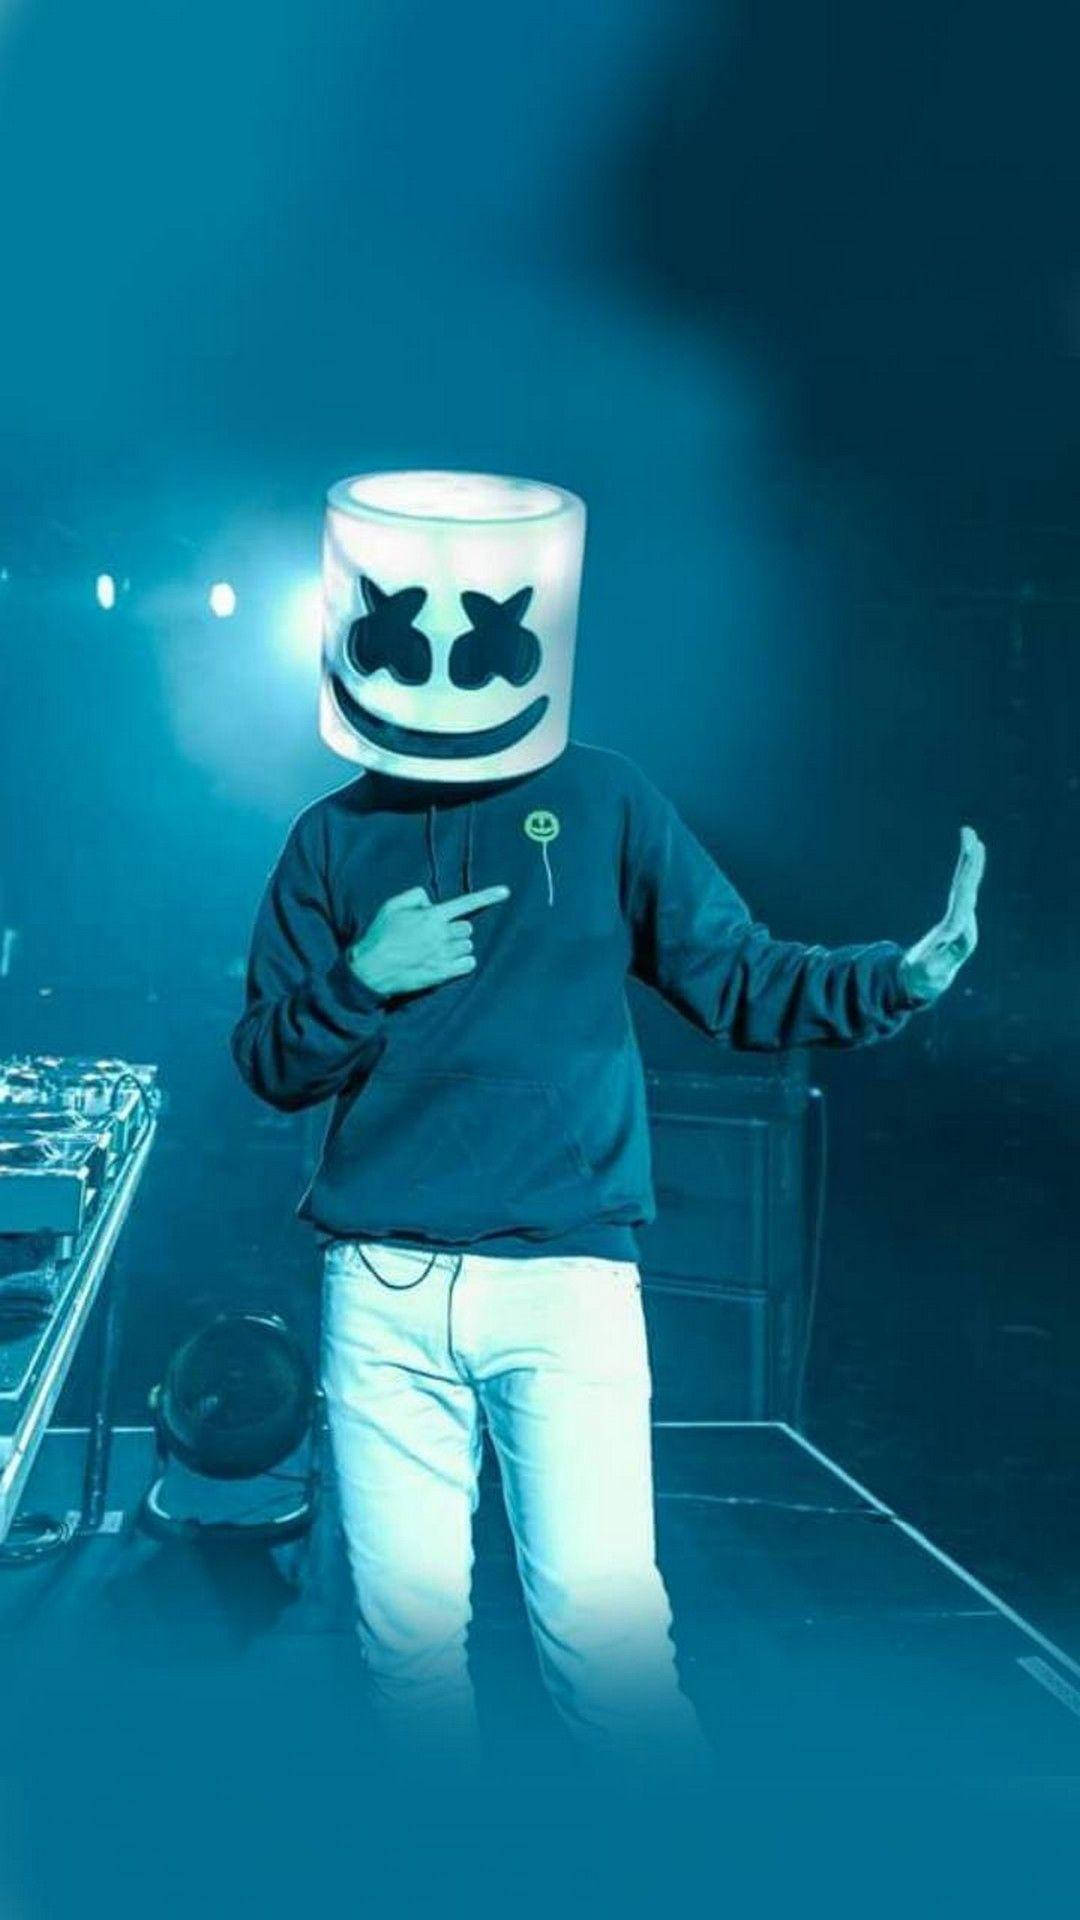 Concert Stage Marshmello Iphone Wallpaper